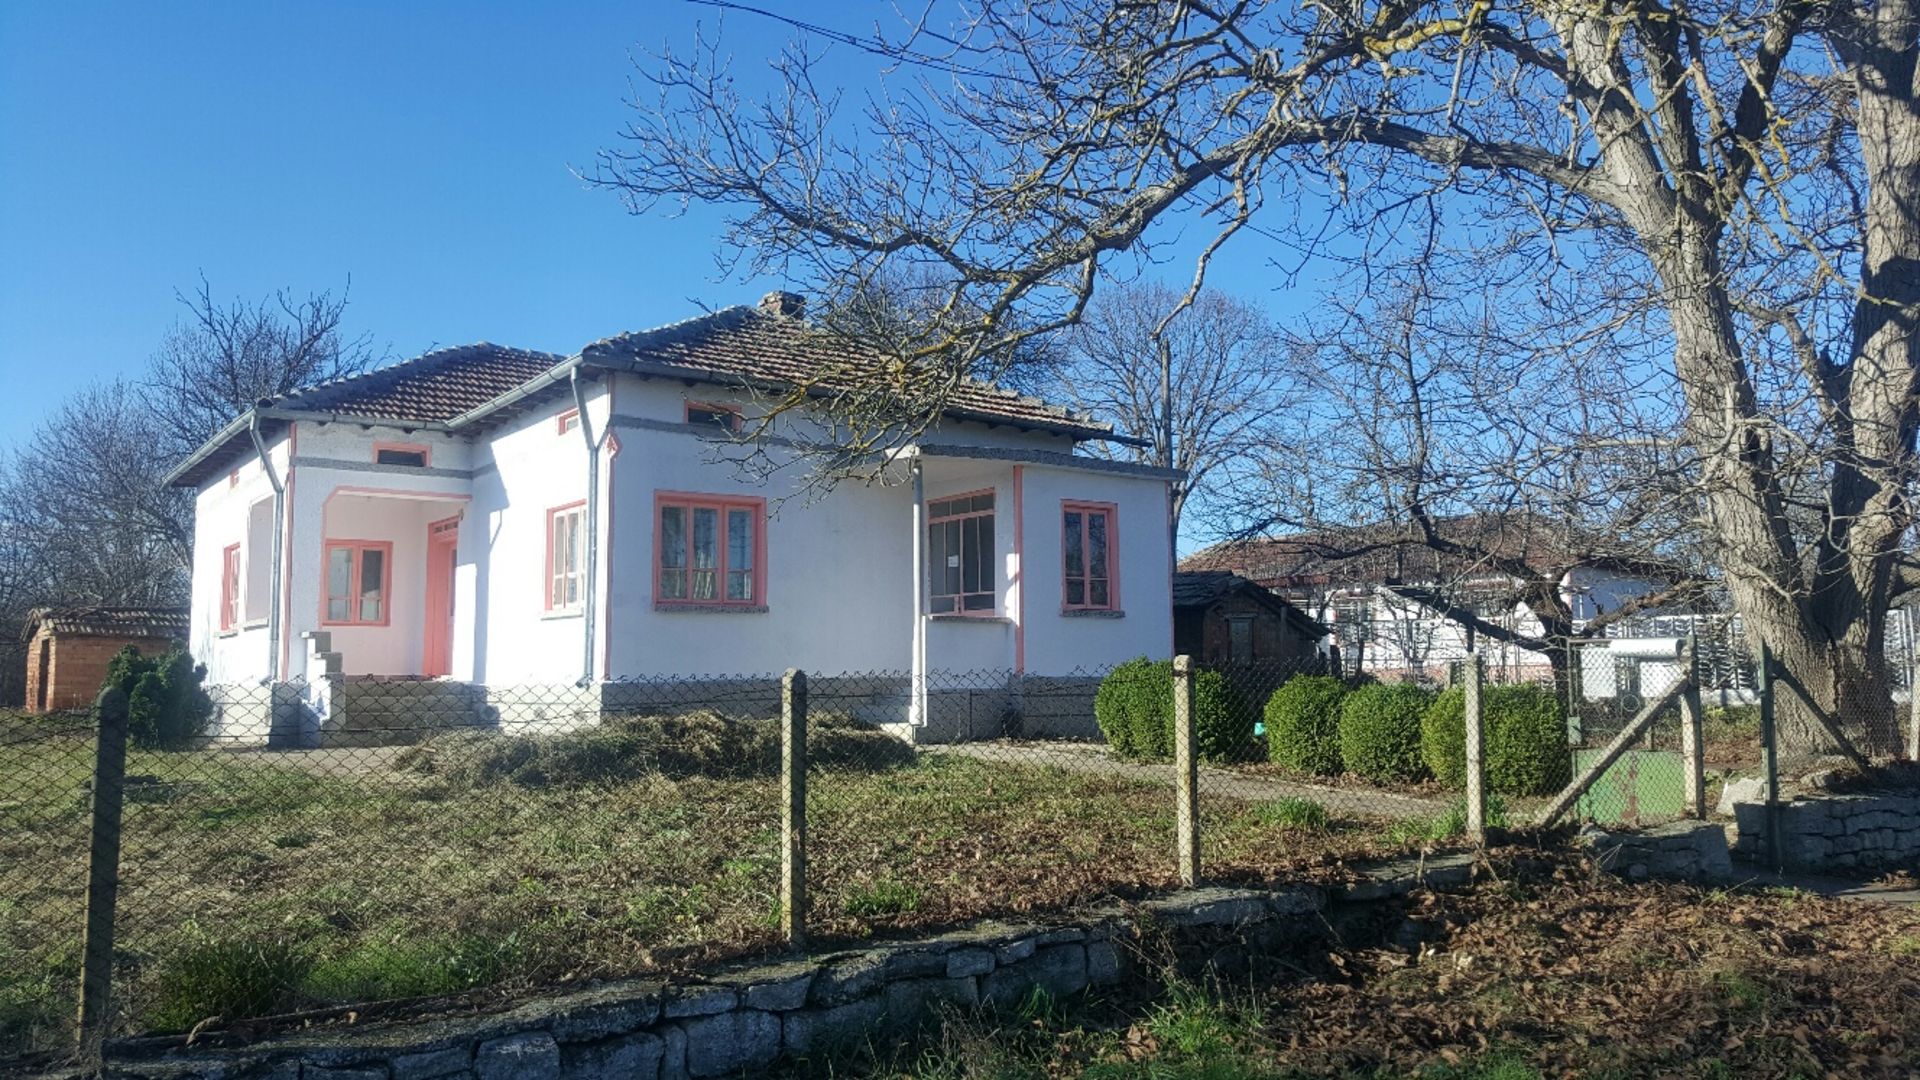 Ready to move into 5 room Bulgarian cottage for sale. With land not far from coast - Image 3 of 42